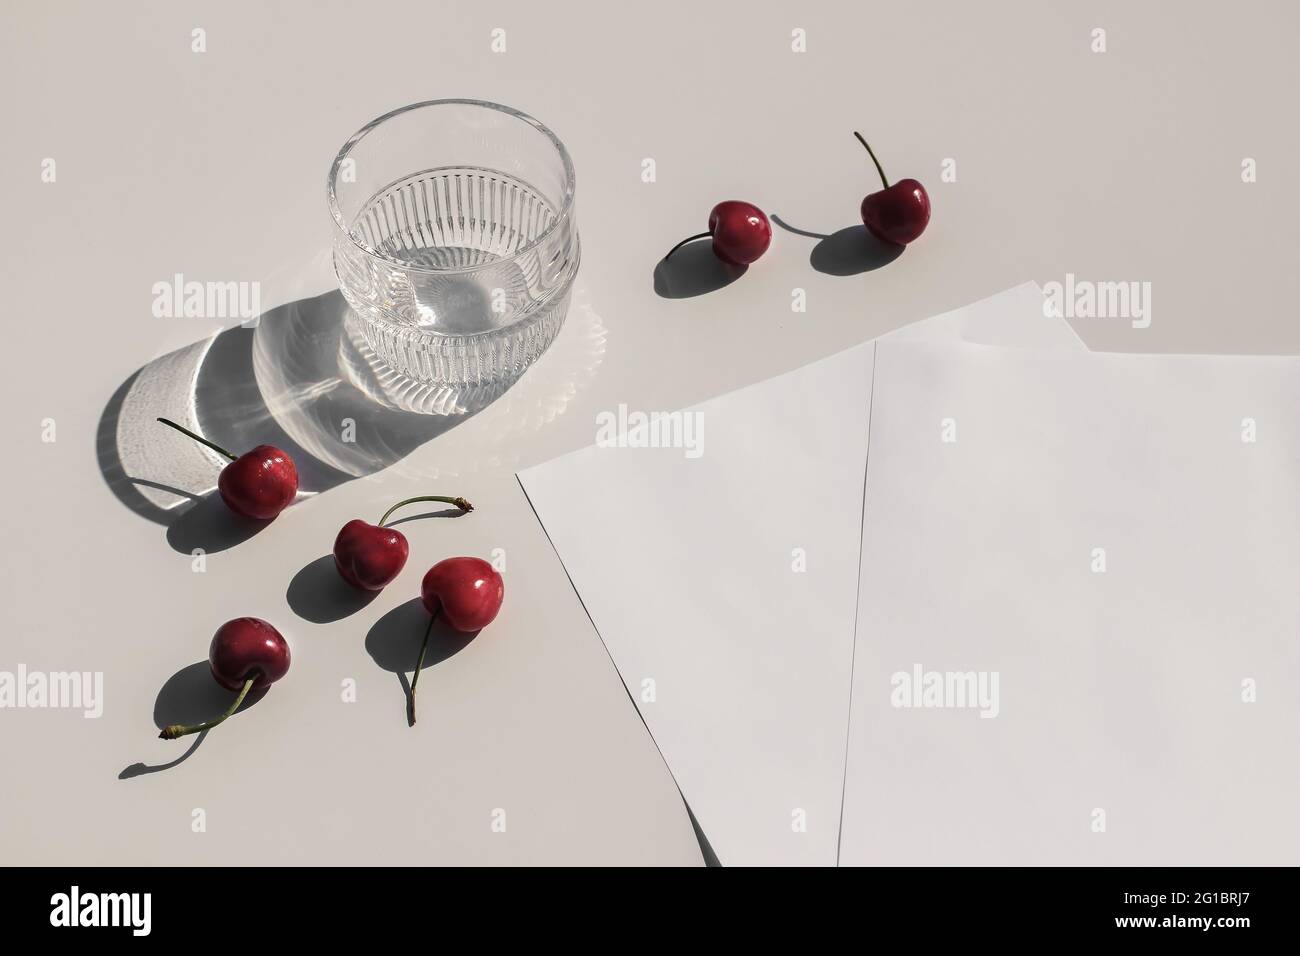 Summer food still life composition. Fresh red cherries fruit on beige table background. Stationery mock up scene. Blank paper pages. Glass of water Stock Photo